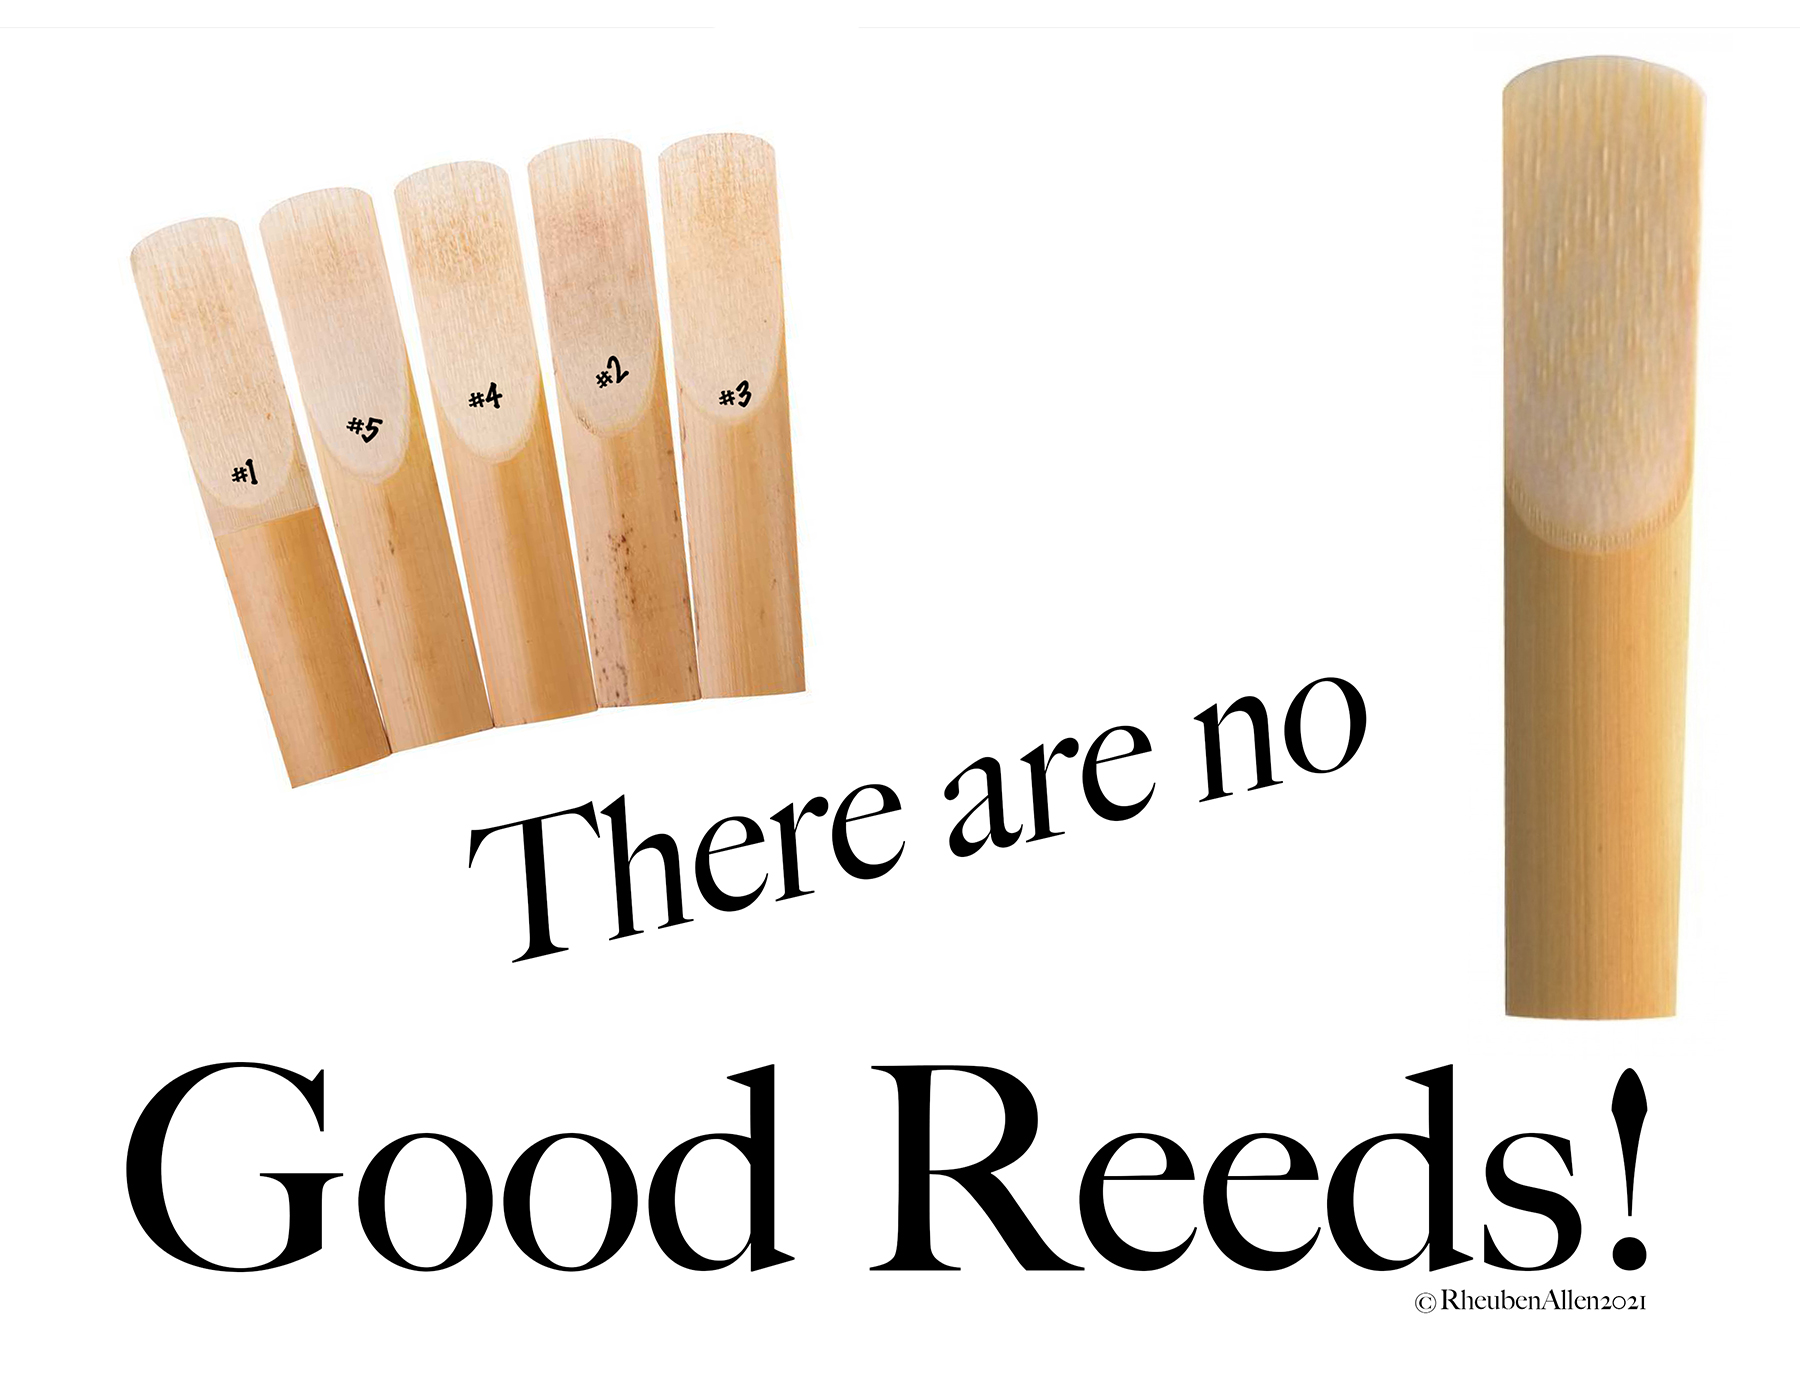 There are no good reeds T shirt by Rheuben Allen